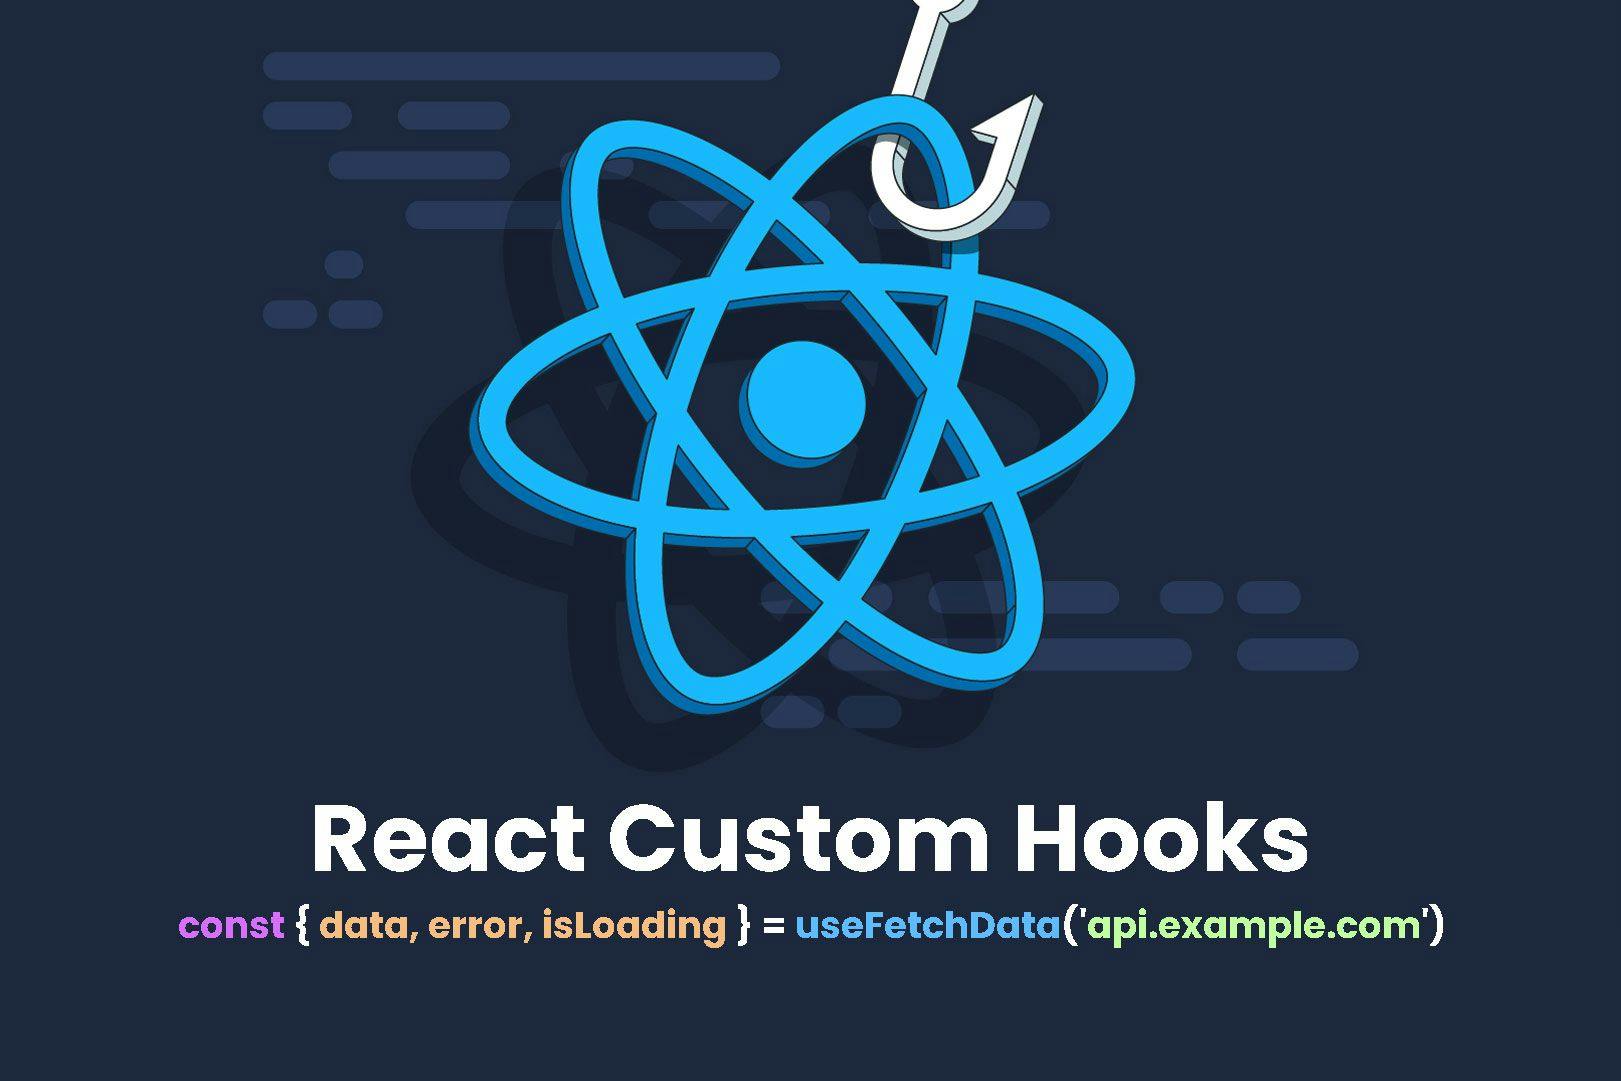 How to Implement Custom Hooks in React Applications